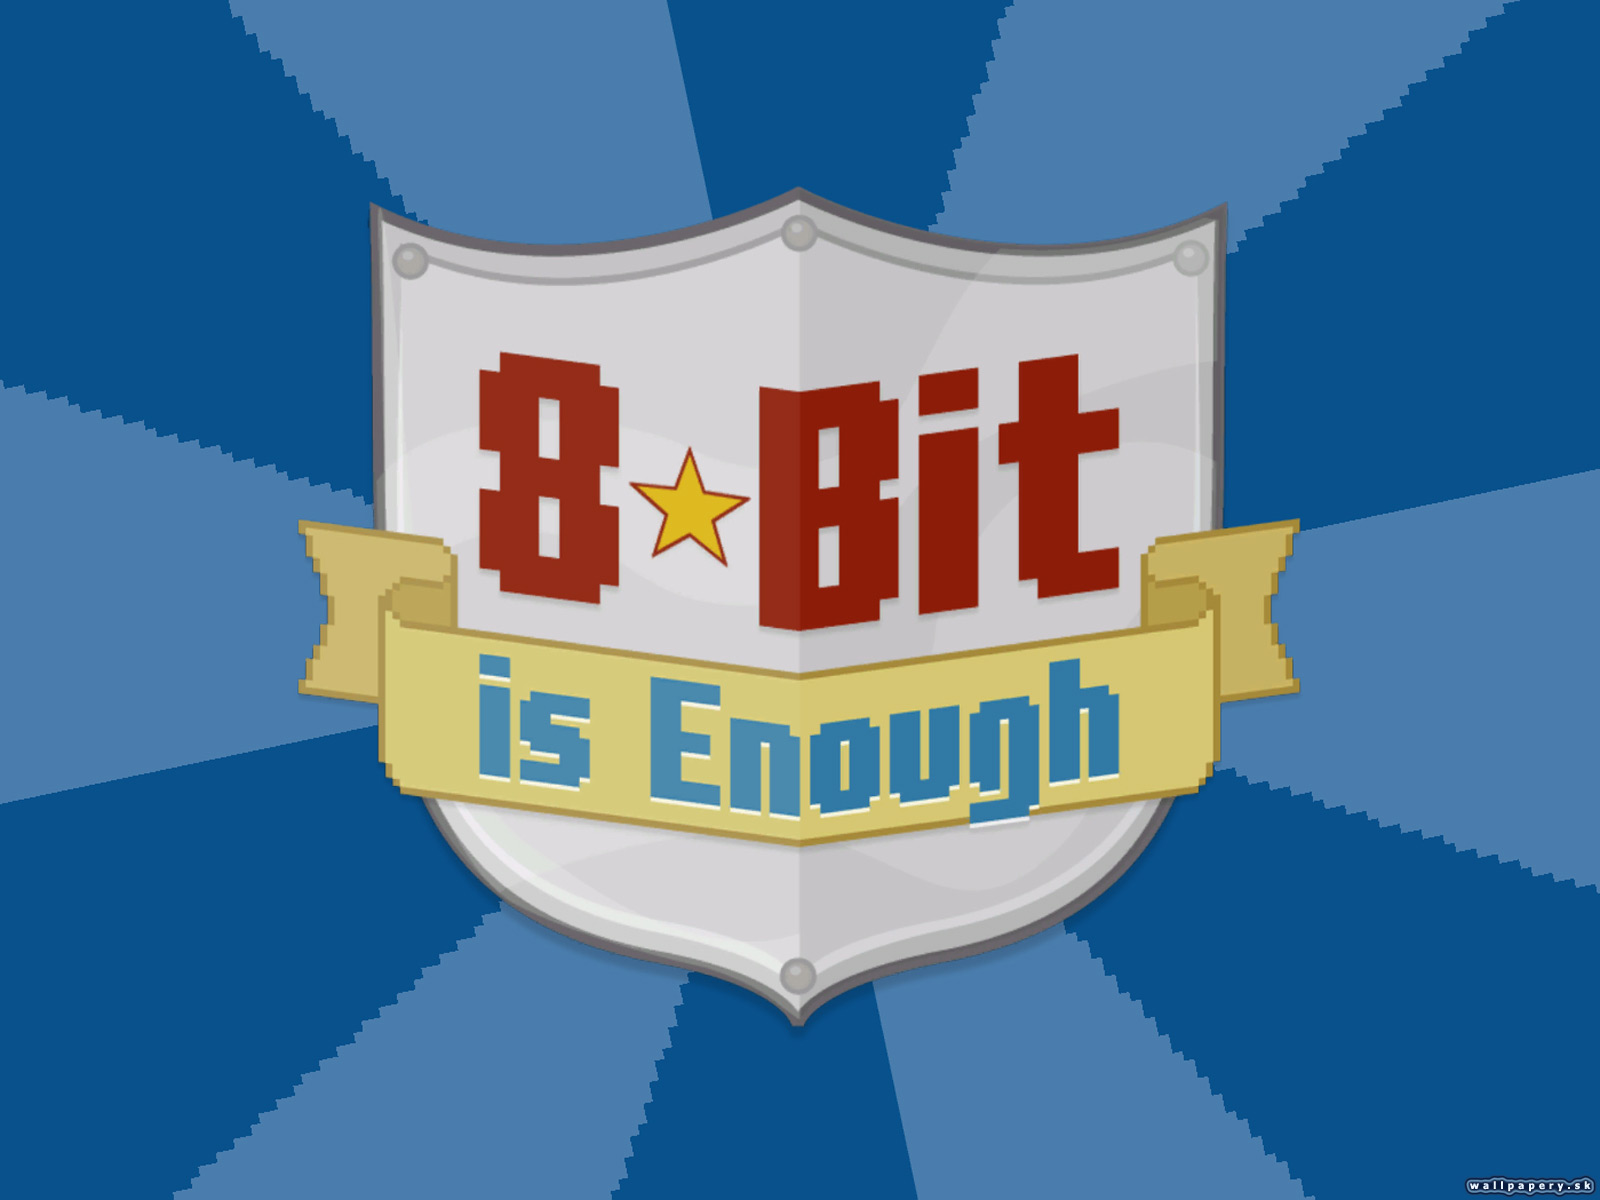 Strong Bad's Episode 5: 8-Bit Is Enough - wallpaper 1